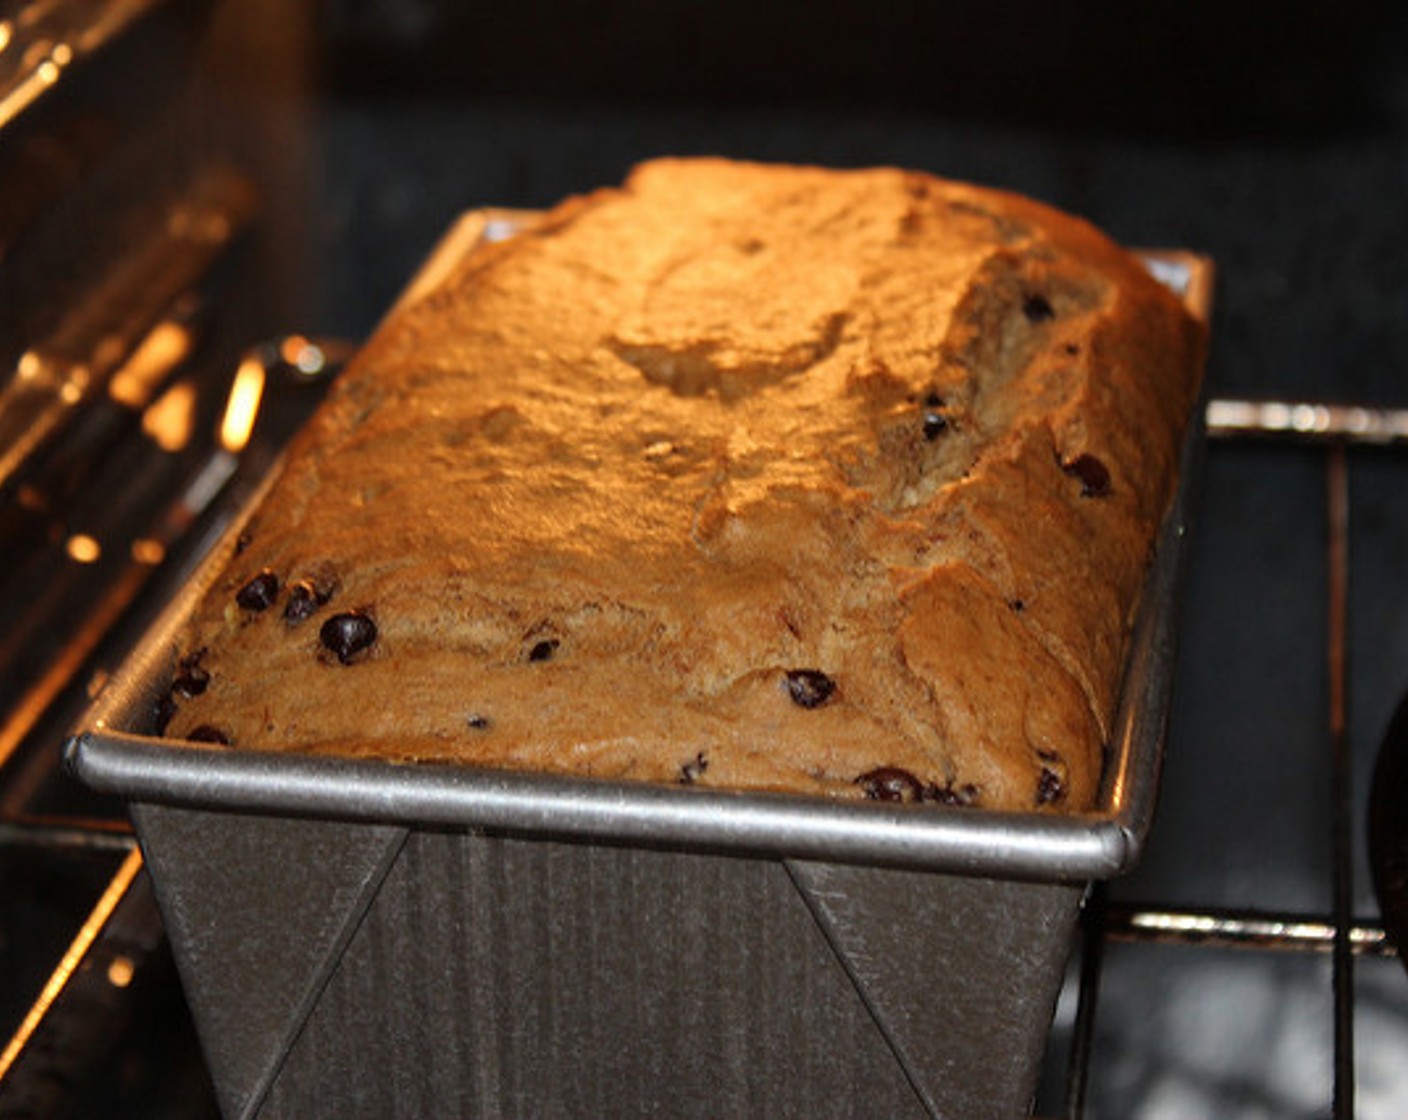 step 7 Place in your preheated oven and bake for 45 – 60 minutes – or until the tester comes out mostly clean - banana bread is always slightly moist. Tent the top of the loaf with aluminum foil if it is browning too quickly.